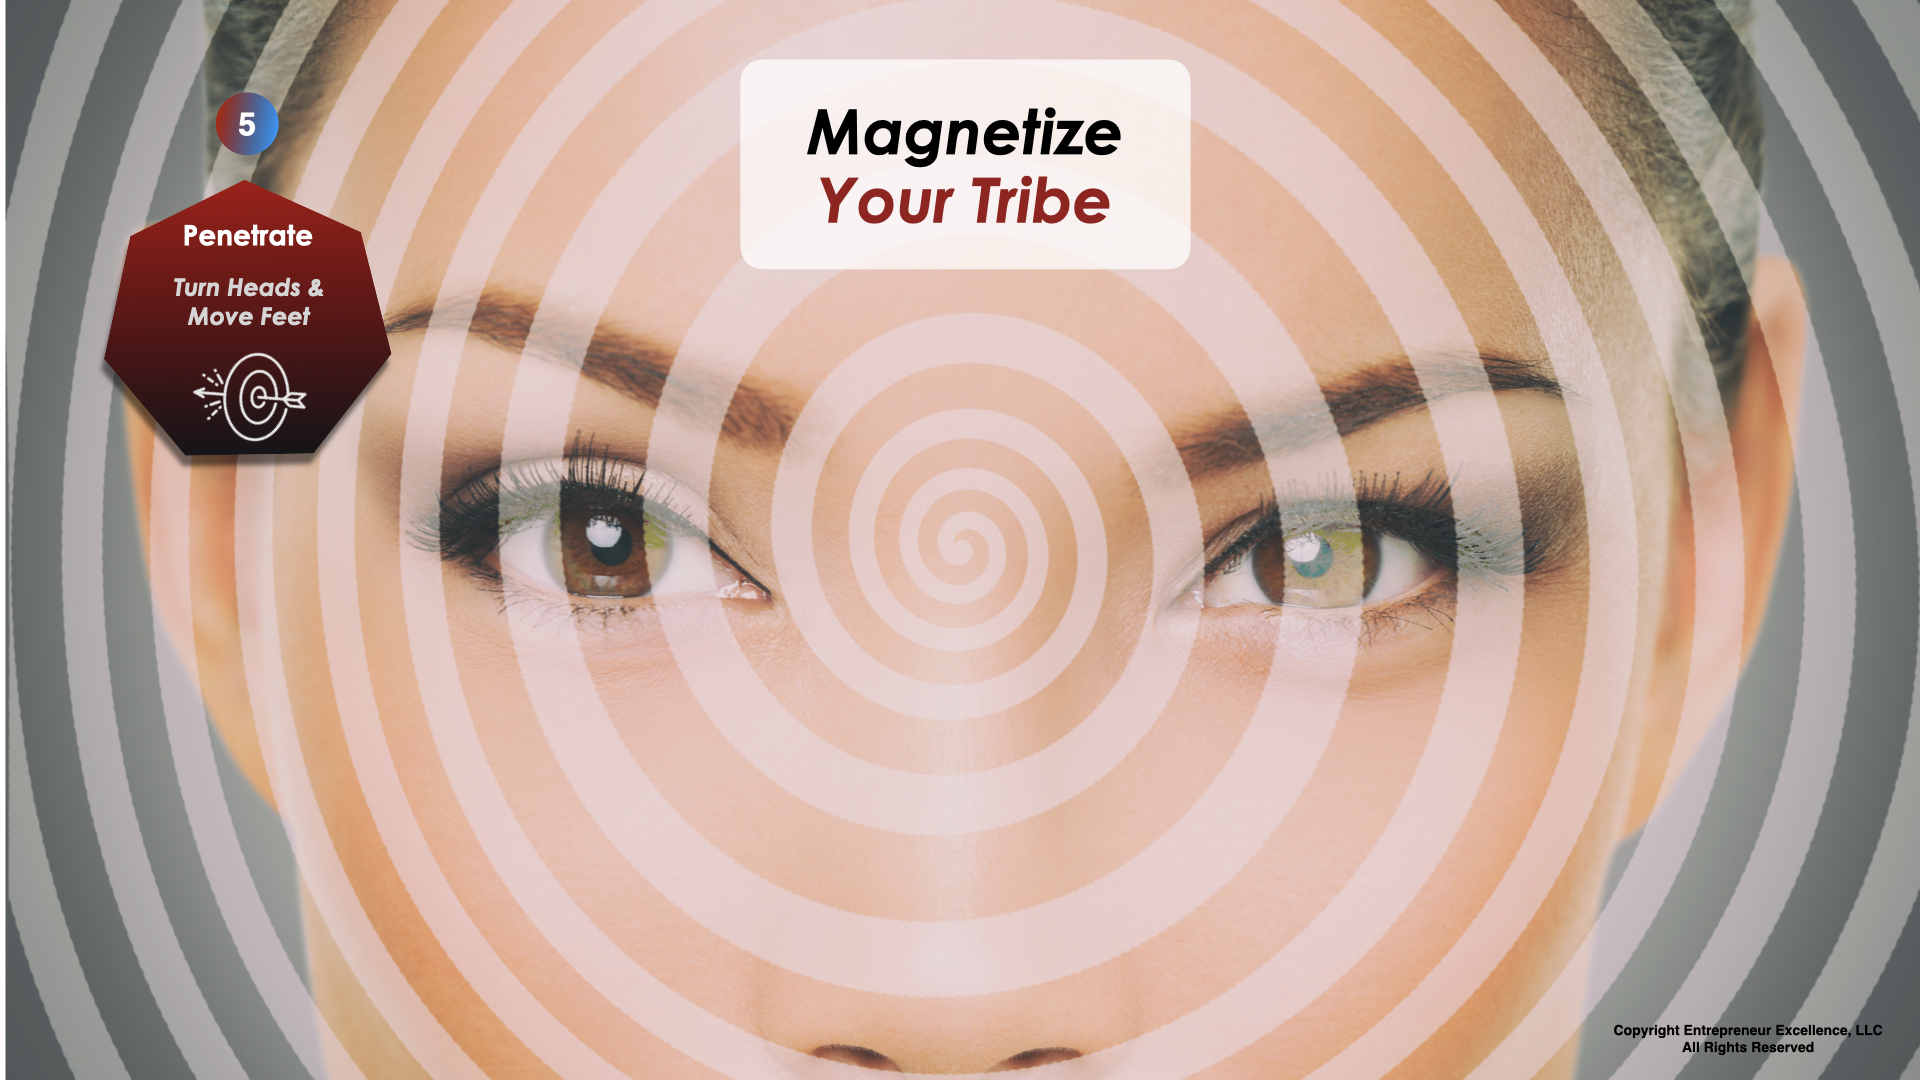 Magnetize your tribe